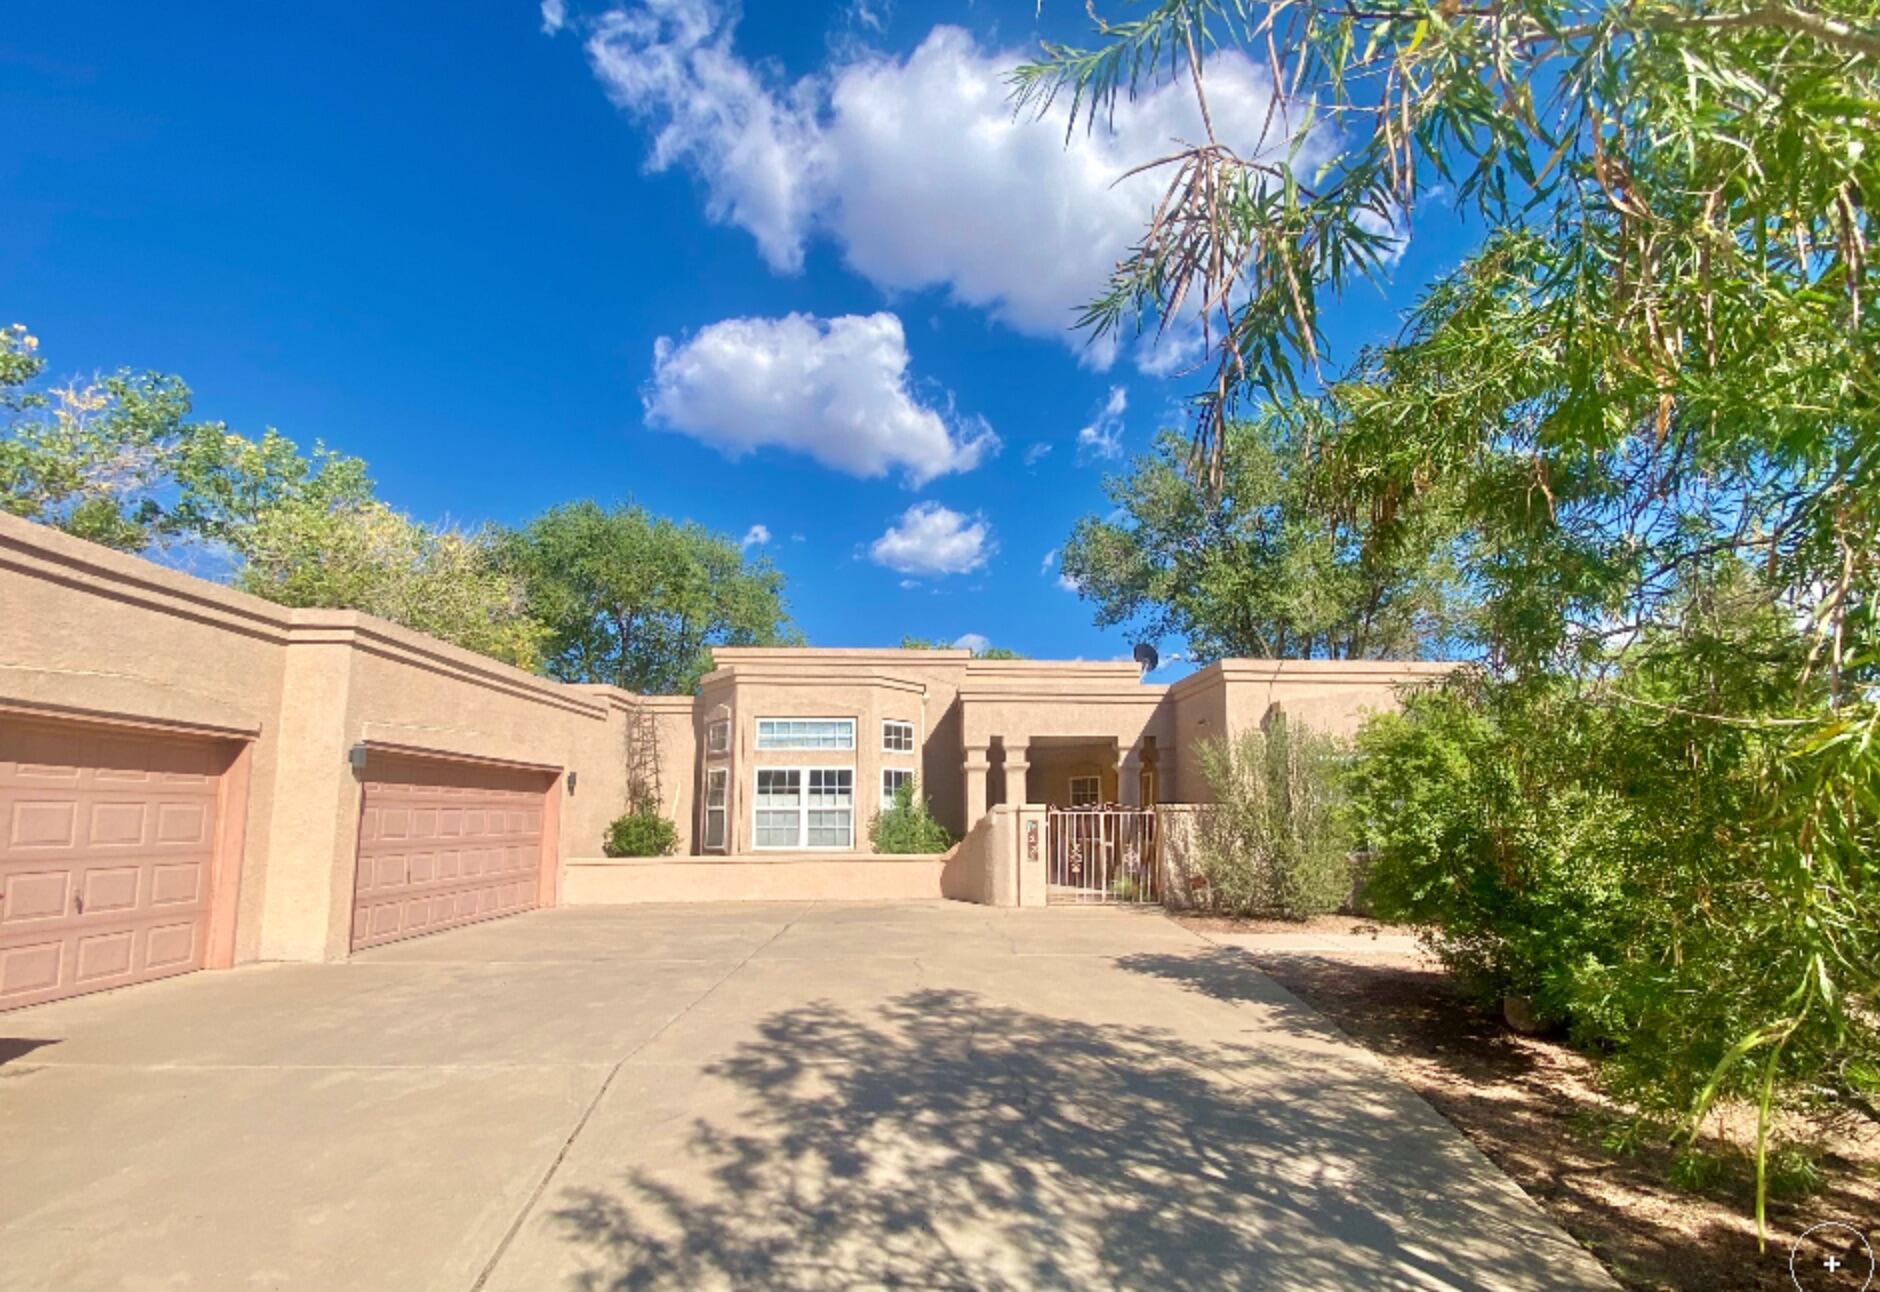 Corrales beauty w/spectacular views of the Sandia Mountains nestled in a quiet cul-de-sac on nearly an acre. 3-wing floorpan w/2+ living areas separates MSTR, guests & study. Covered patio, wood floors, country kitchen, bkfst nook, formal dining rm & wet bar. Master retreat w/sitting rm, 2-sided FP, bay window seat, WIC closet, pvt patio off Mst BA w/outdoor hot tub. 2nd wing w/2 BR's & full J&J BA. Study w/separate entrance & hall BA off 3rd wing. Fully-finished basement w/Living Rm, BR & 1/2 BA (great for entertainment, media rm, man-cave, separate living). Laundry, W/D, central-vac, Newer Roof, 3-car garage w/side yard access. Lg fully-fenced, gated backyard w/above ground vinyl pool, grassy area, fruit trees, storage sheds & space for RV/Boat parking. Enjoy tranquil Corrales living!